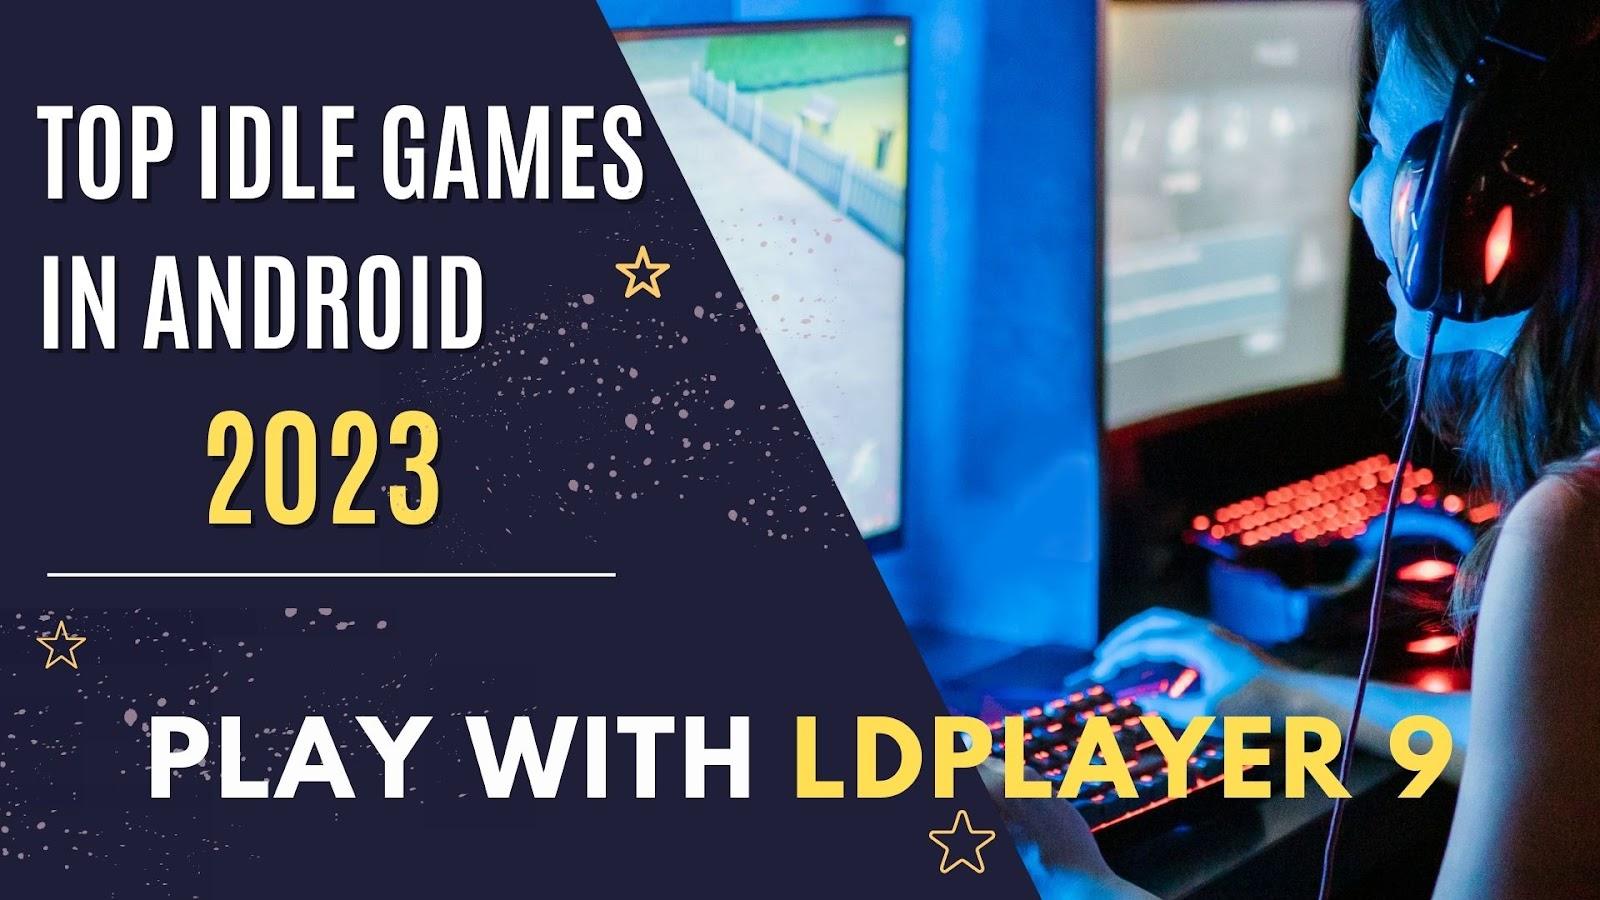 Top Idle Games in Android 2023 Play With LDPlayer 9